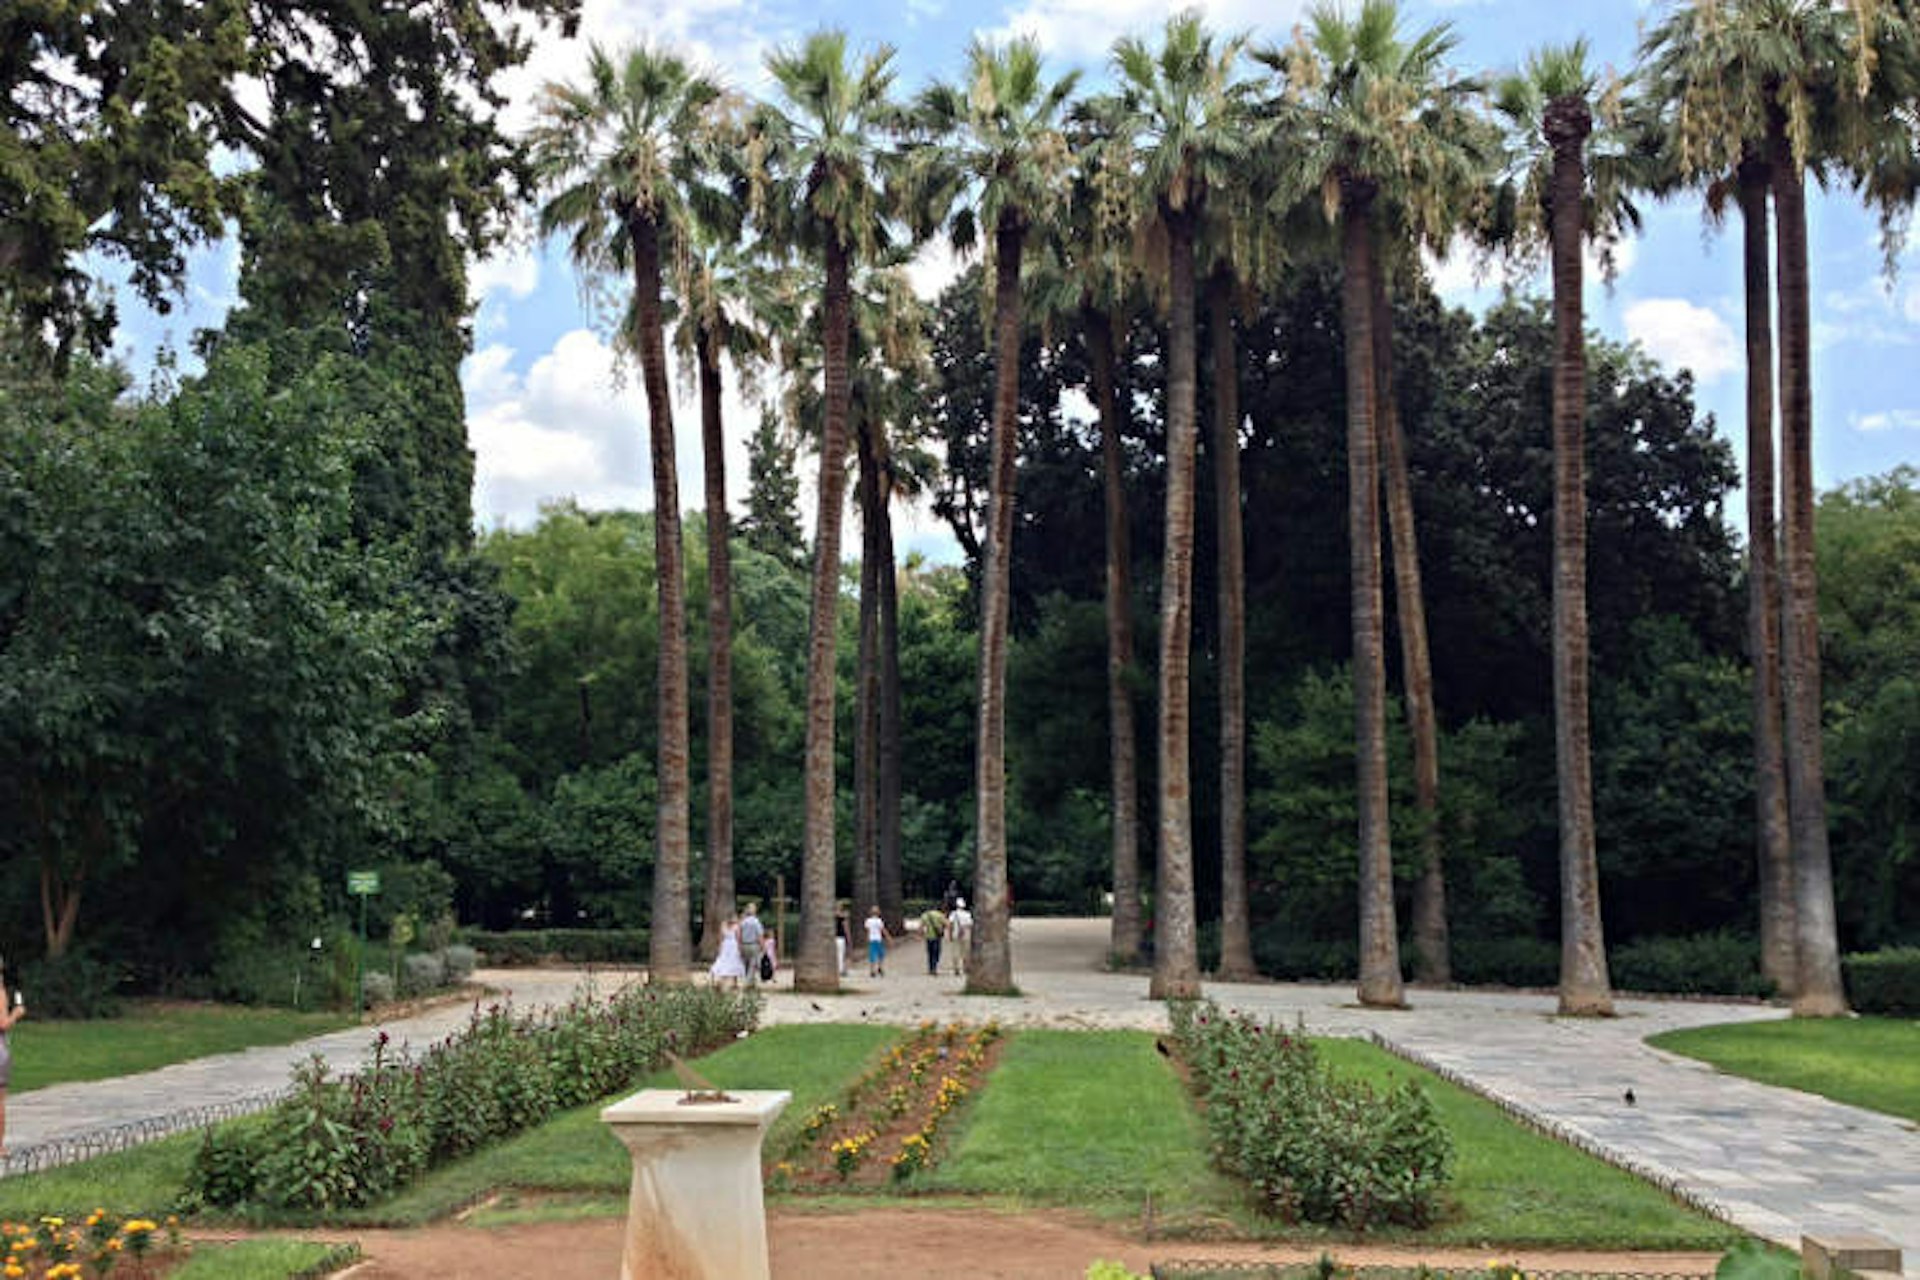 The National Gardens offer a pleasant respite from Athens’ hustle. Image by Dimitris Graffin / CC BY 2.0